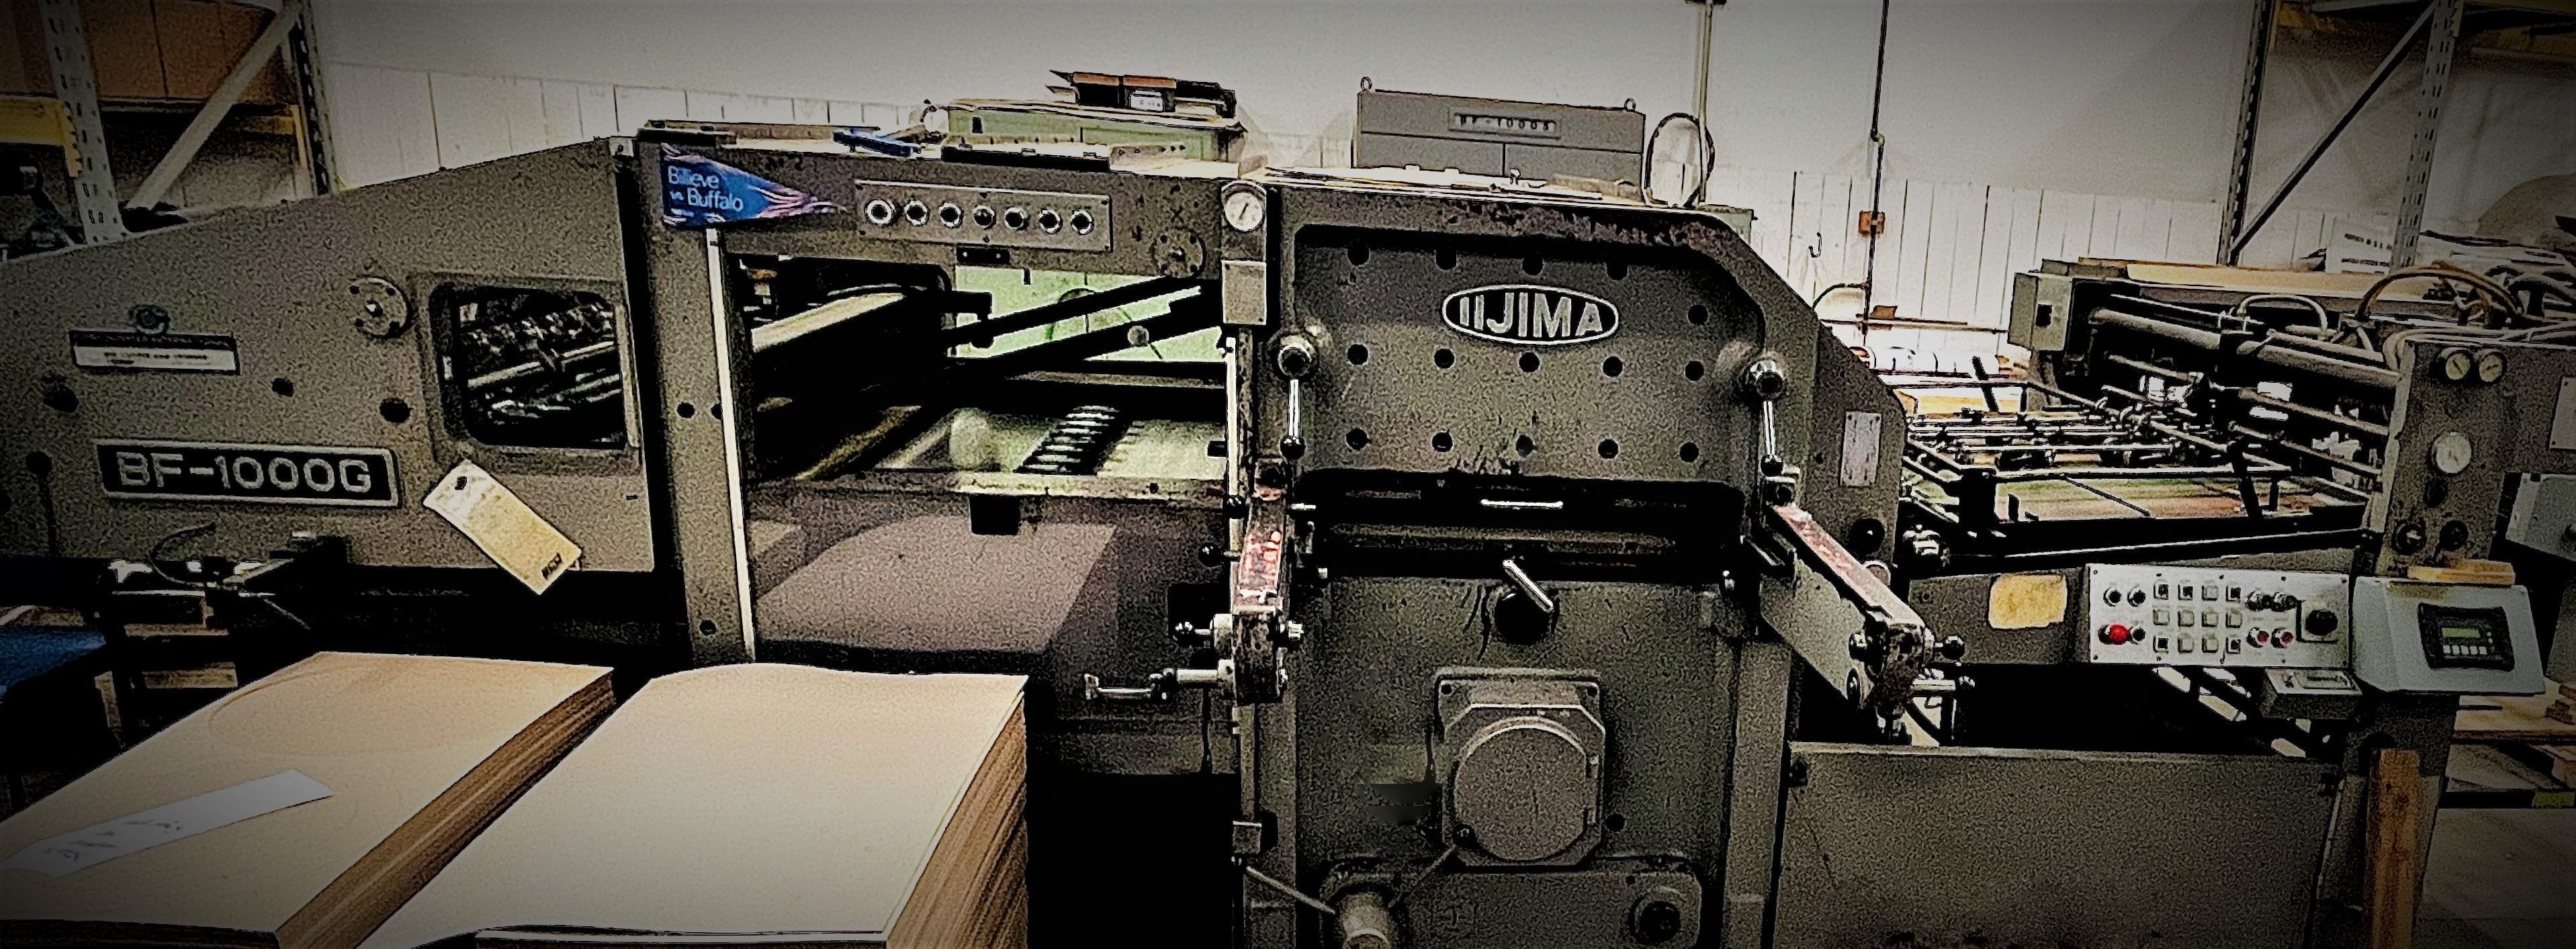 The Iijima press can diecut thin paper or something as thick as chipboard.